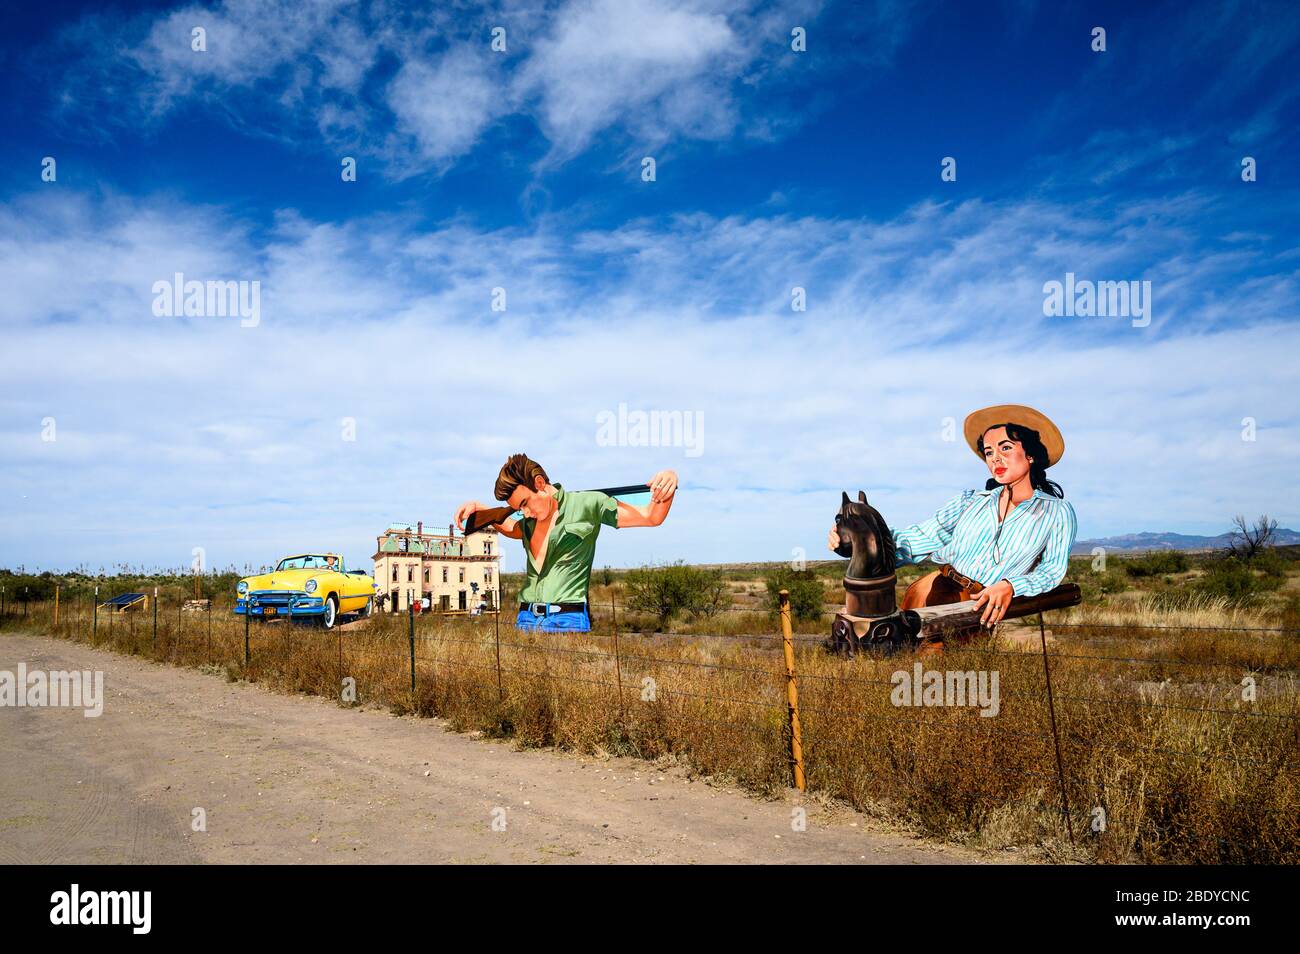 This roadside attraction near Marfa, Texas called Giant Marfa pays tribute to the 'Giant' movie, starring James Dean and Liz Taylor. Stock Photo